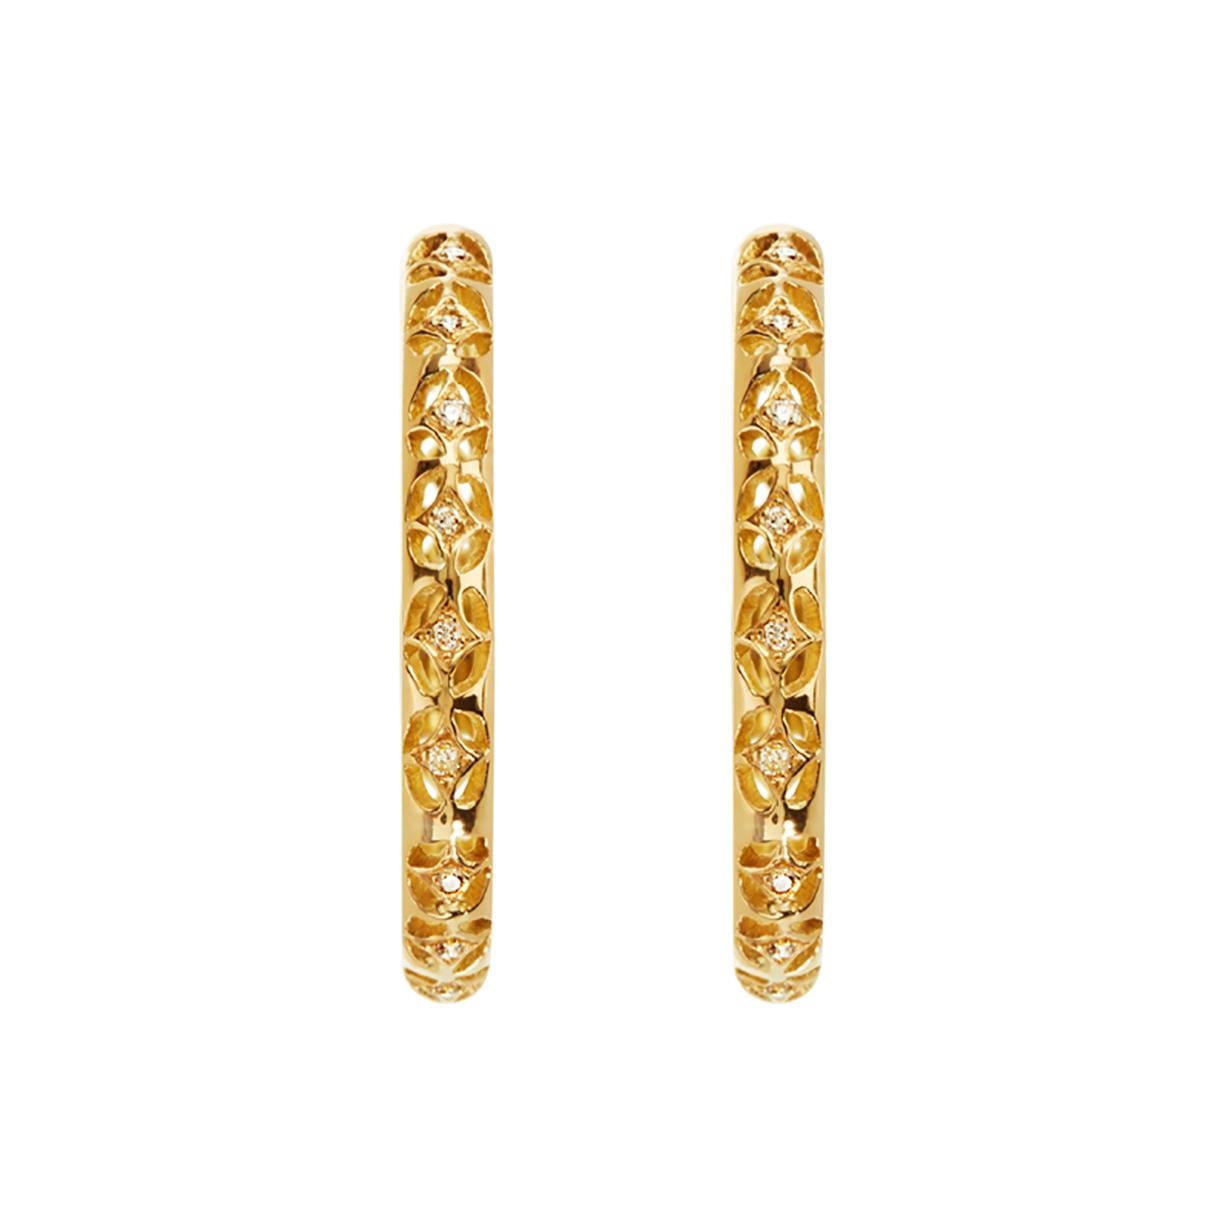 Handcrafted 0,19 Carat Diamonds 18 Karat Yellow Gold Hoop Earrings. Delicate hand pierced lace hoop adorned with white diamonds. Can be worn both with a casual outfit for an every day look or with a more elegant outfit. Showcasing our designer's